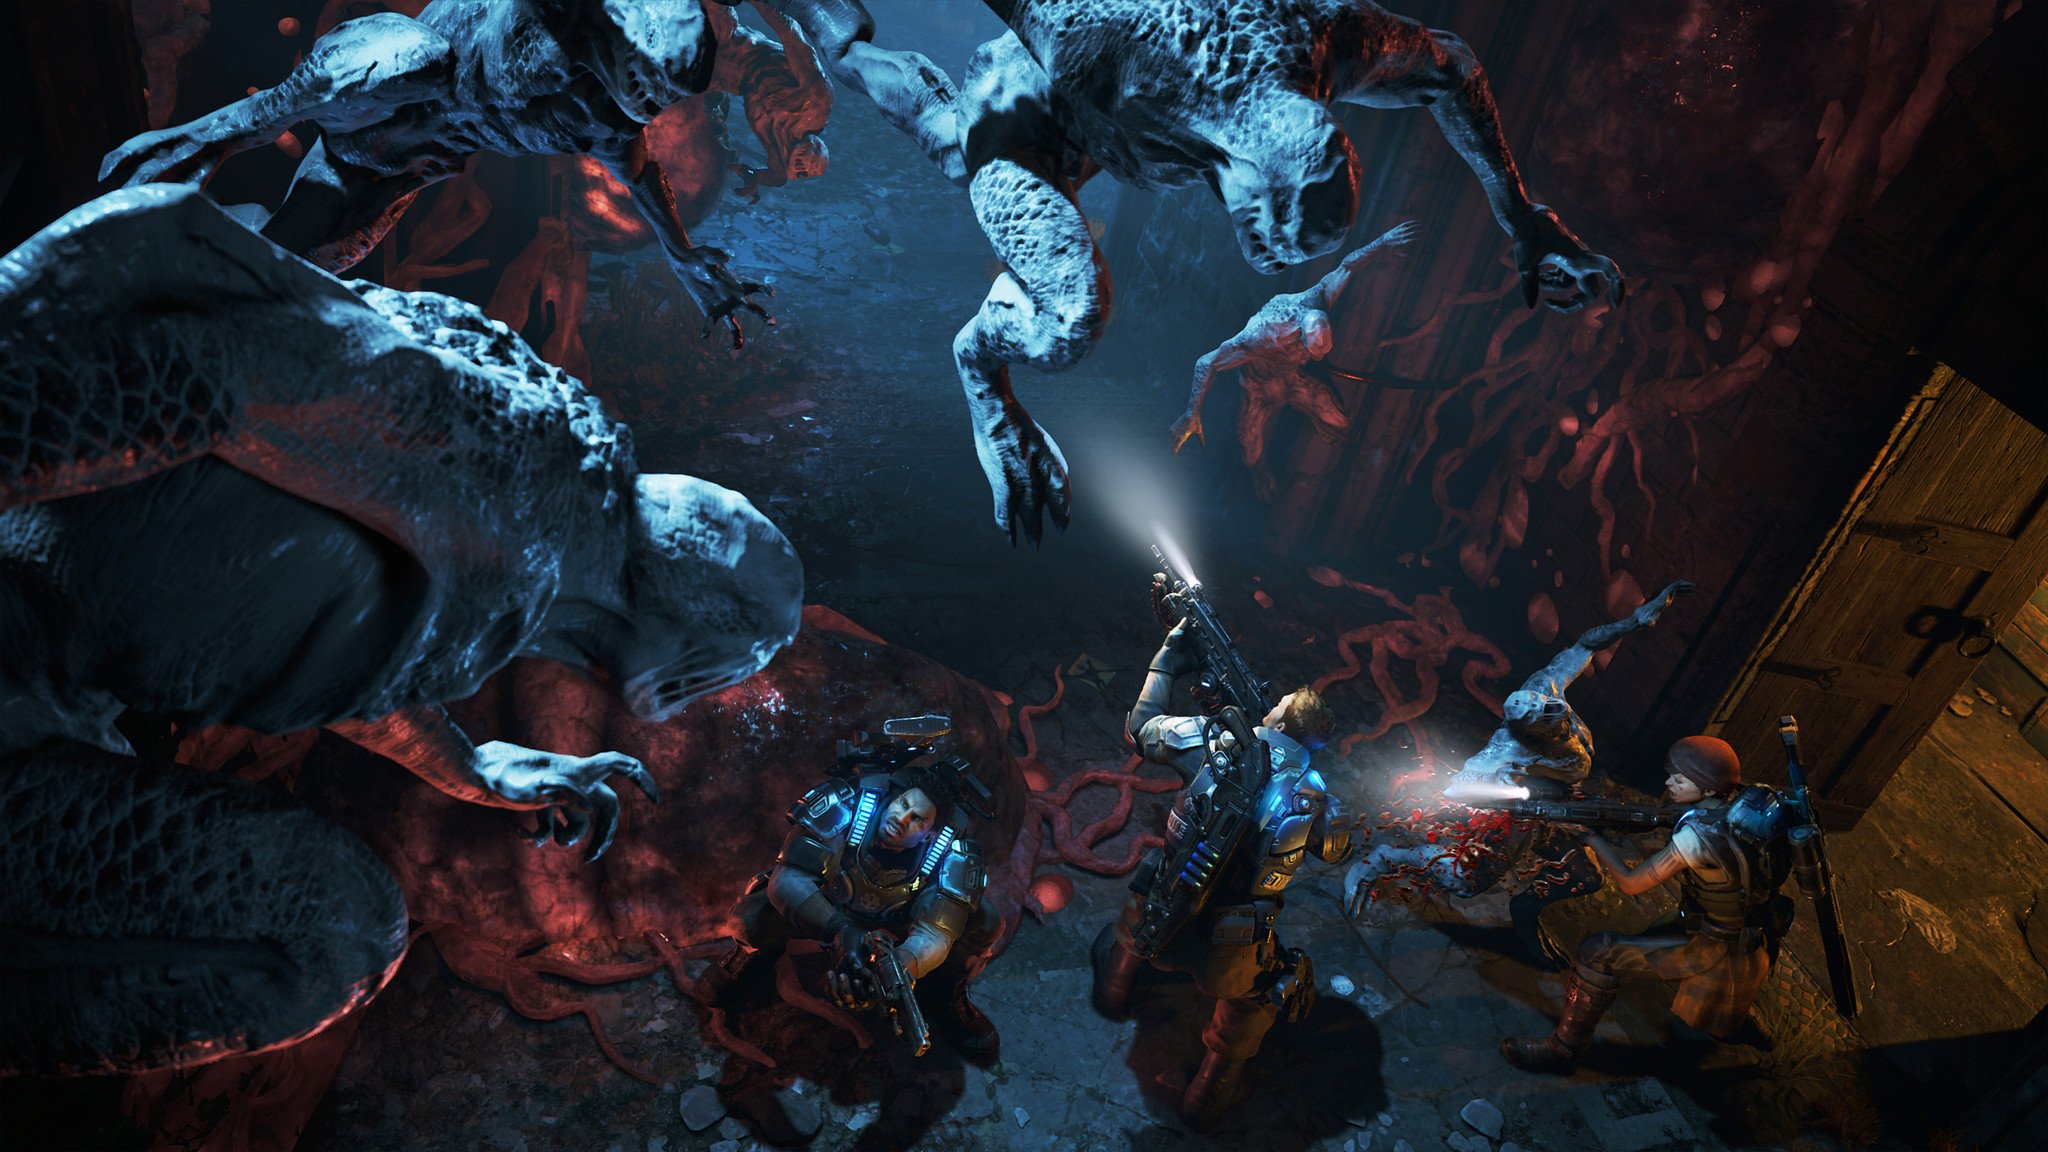 Gears of War 4's new Horde mode is a deep but giddy world of tactical  base-building, where every person matters